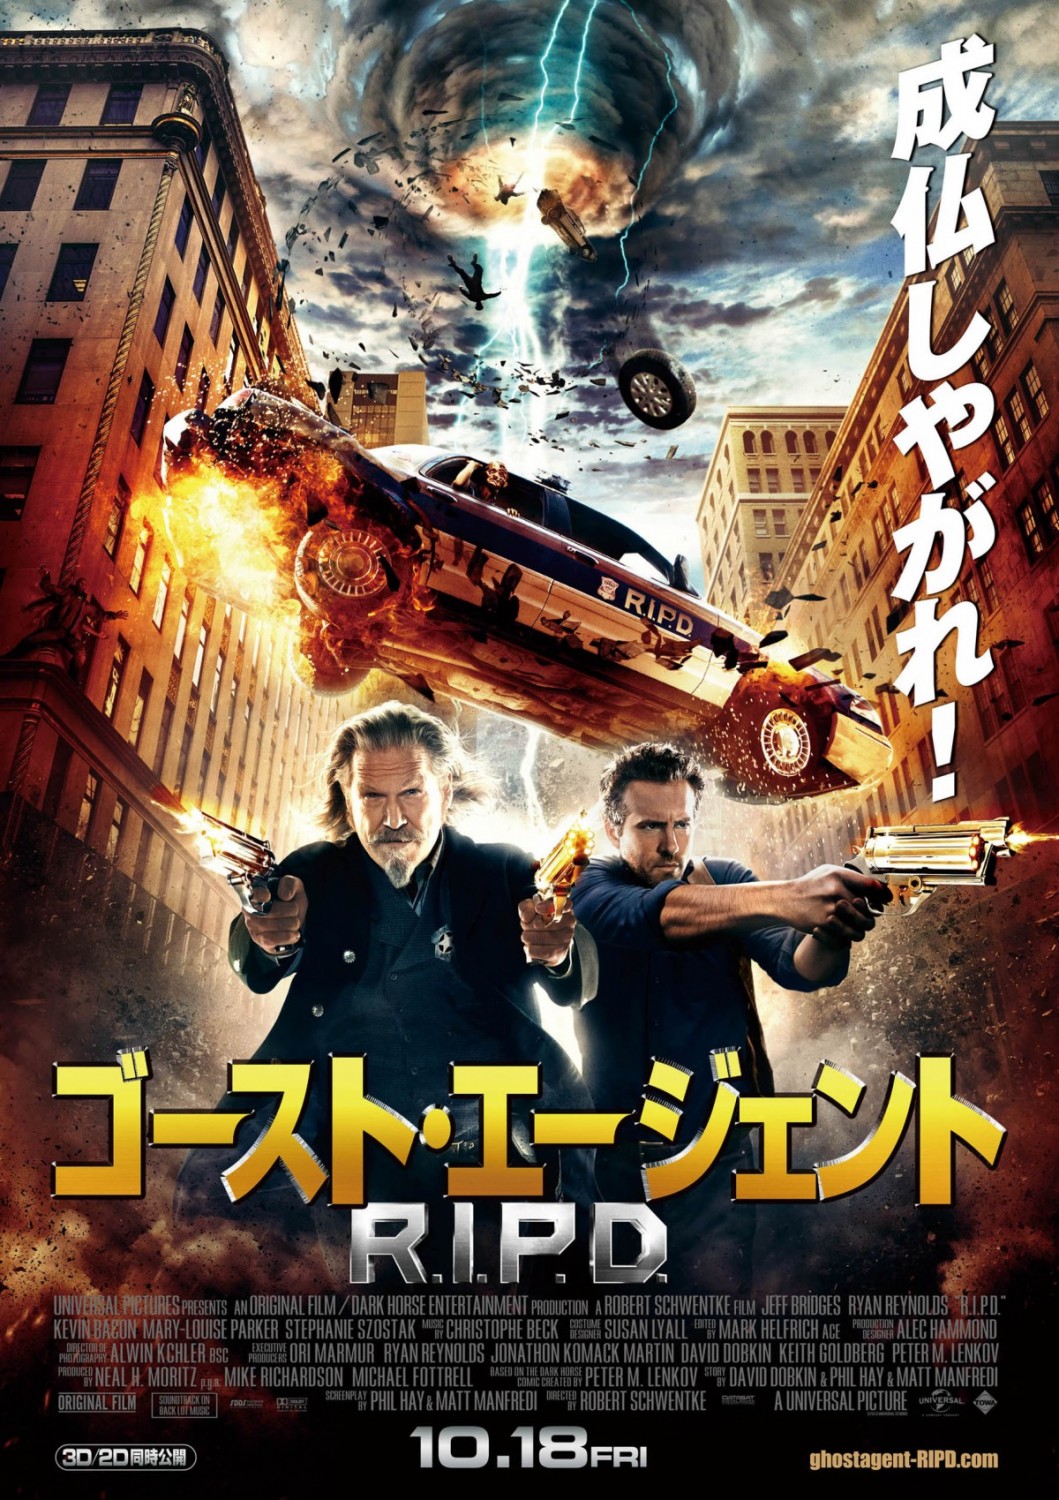 On R.I.P.D and its Sequel R.I.P.D. 2 